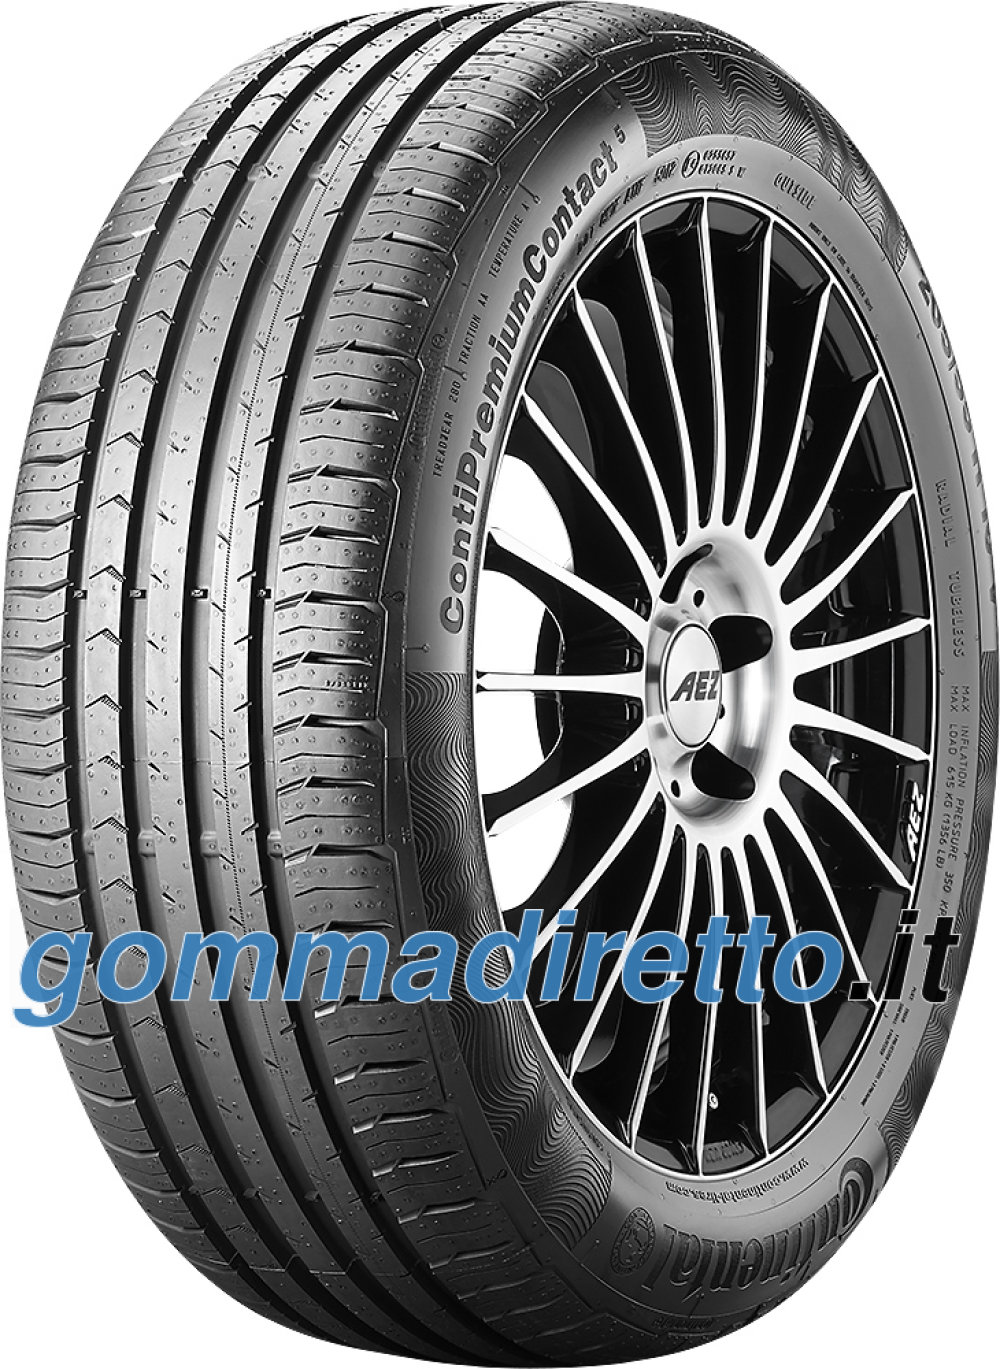 Image of Continental ContiPremiumContact 5 ( 205/55 R16 91W AO )